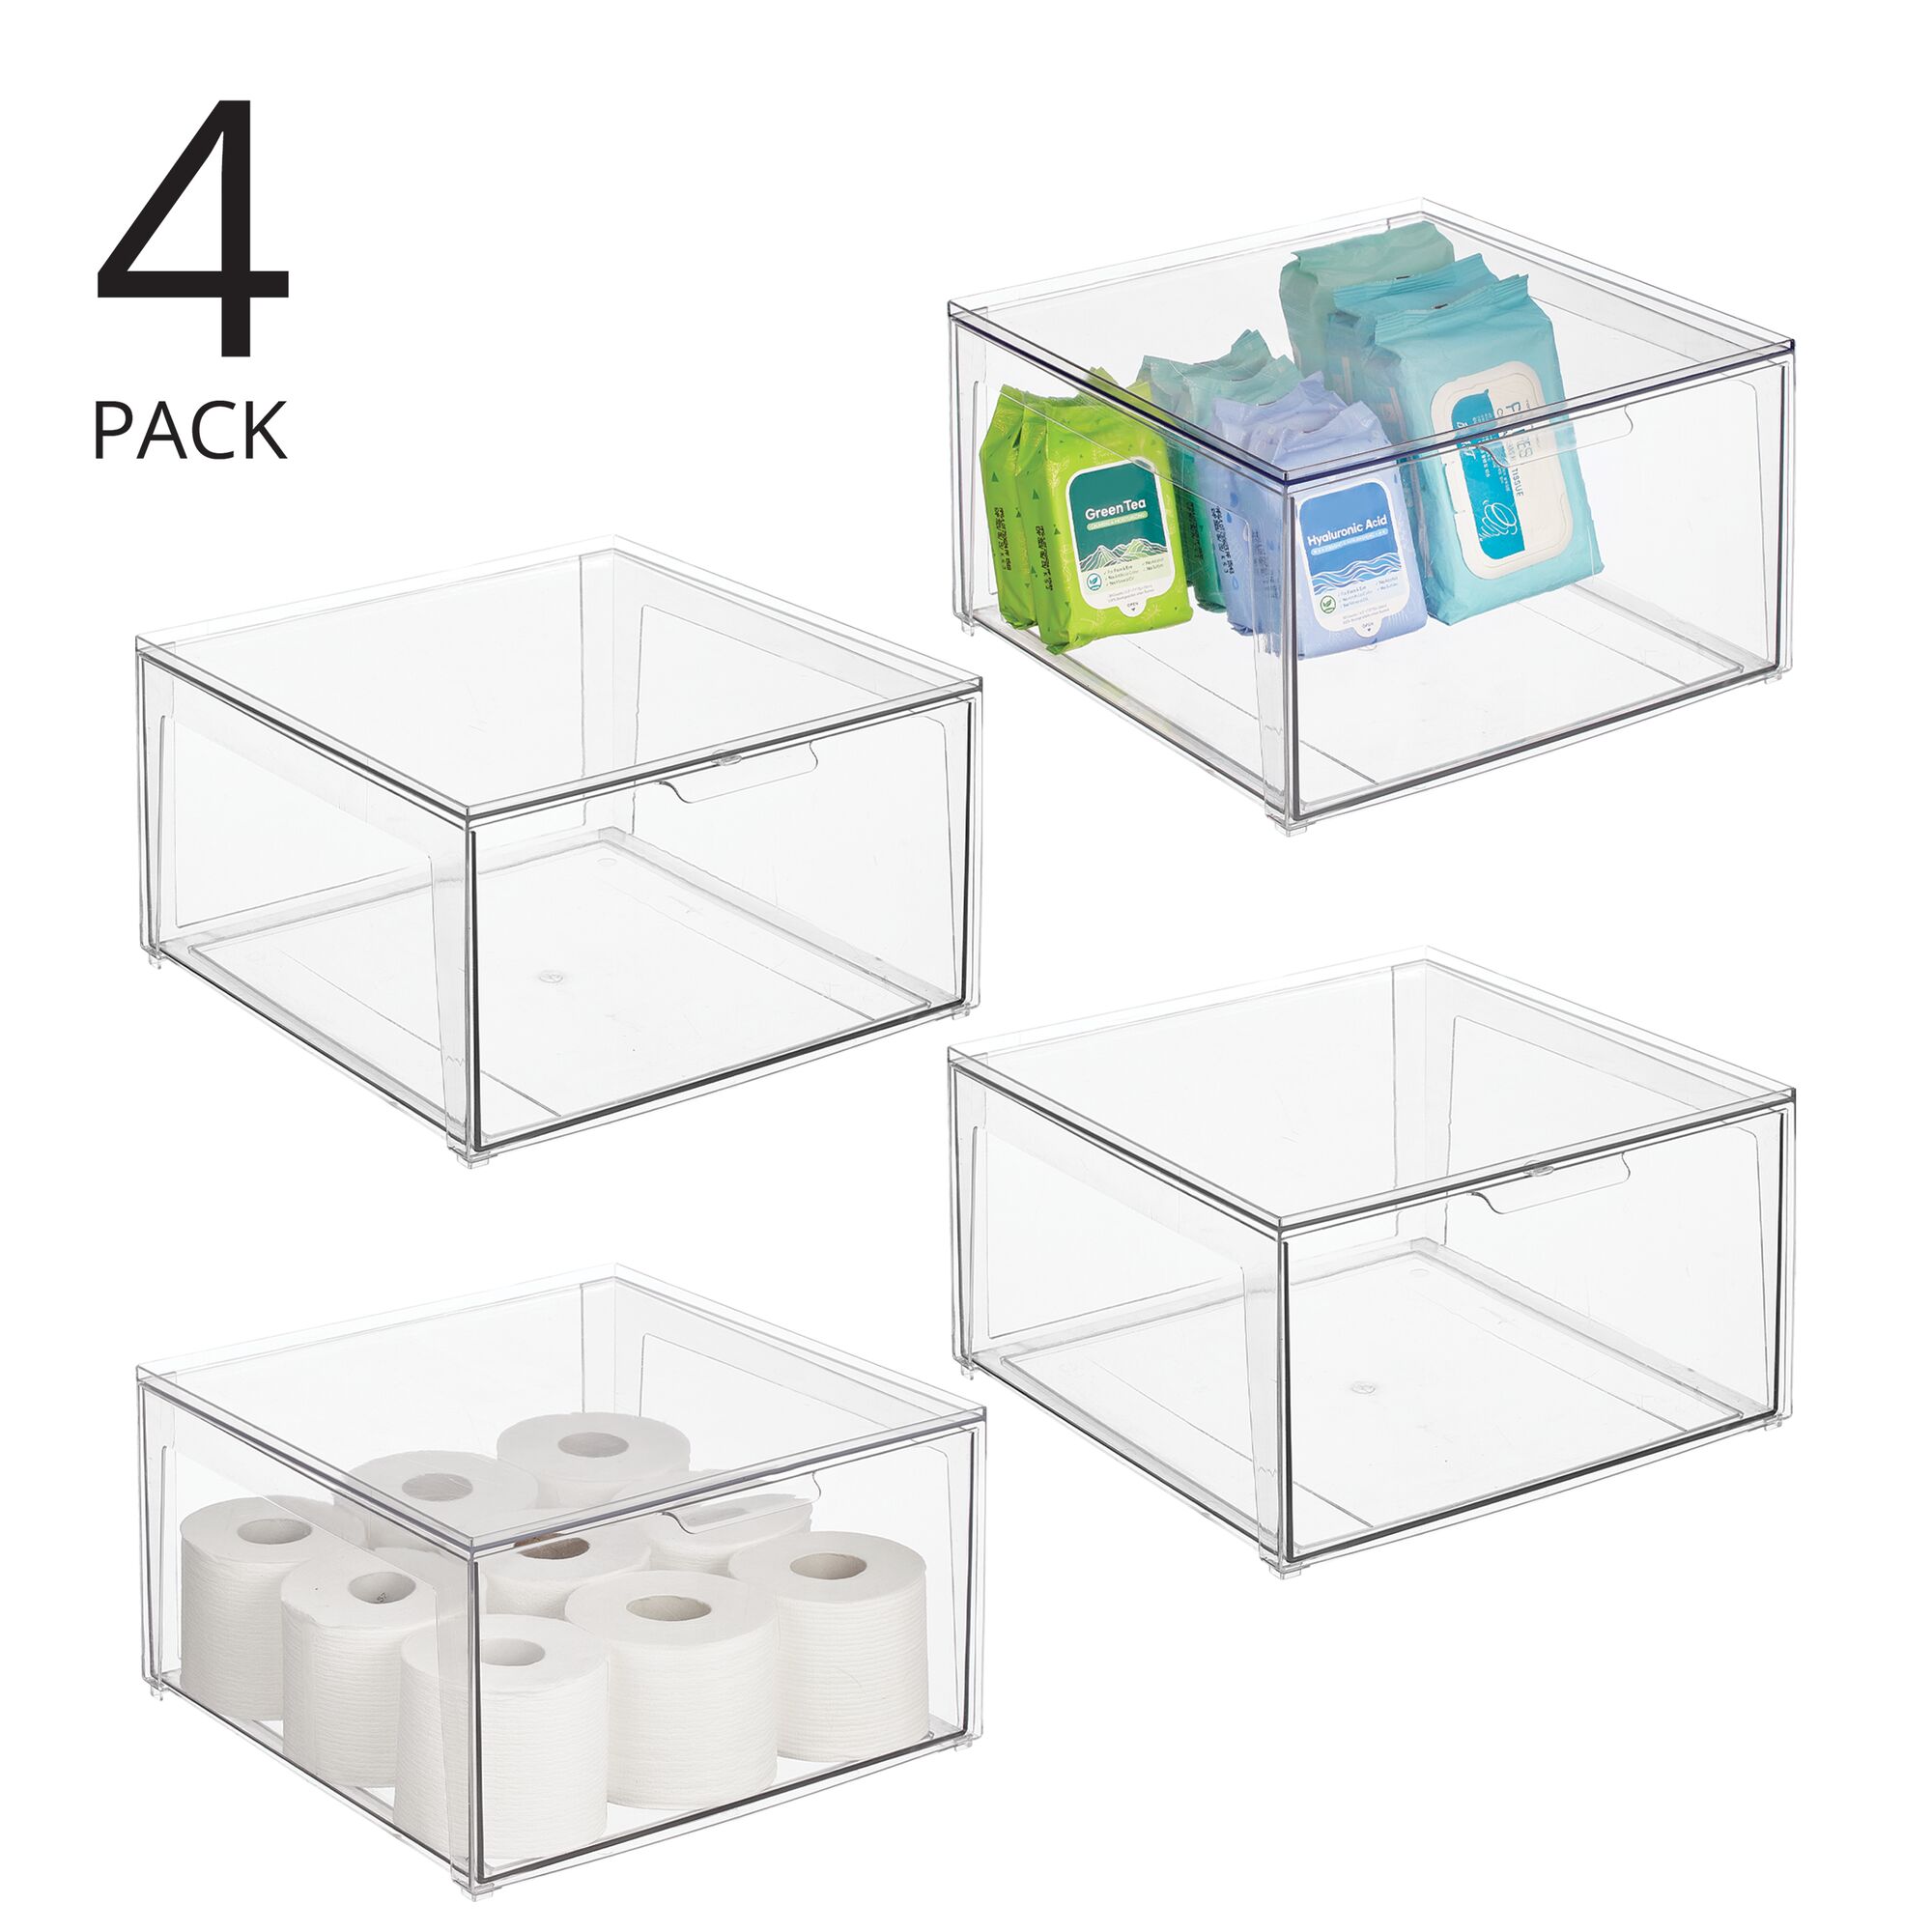  ReadySpace Large Plastic Containers for Organizing and Storage  Bins for Closet, Kitchen, Office, or Pantry Organization, 14.75-Inch x  8-Inch x 7-Inch 6-Pack, Clear : Home & Kitchen